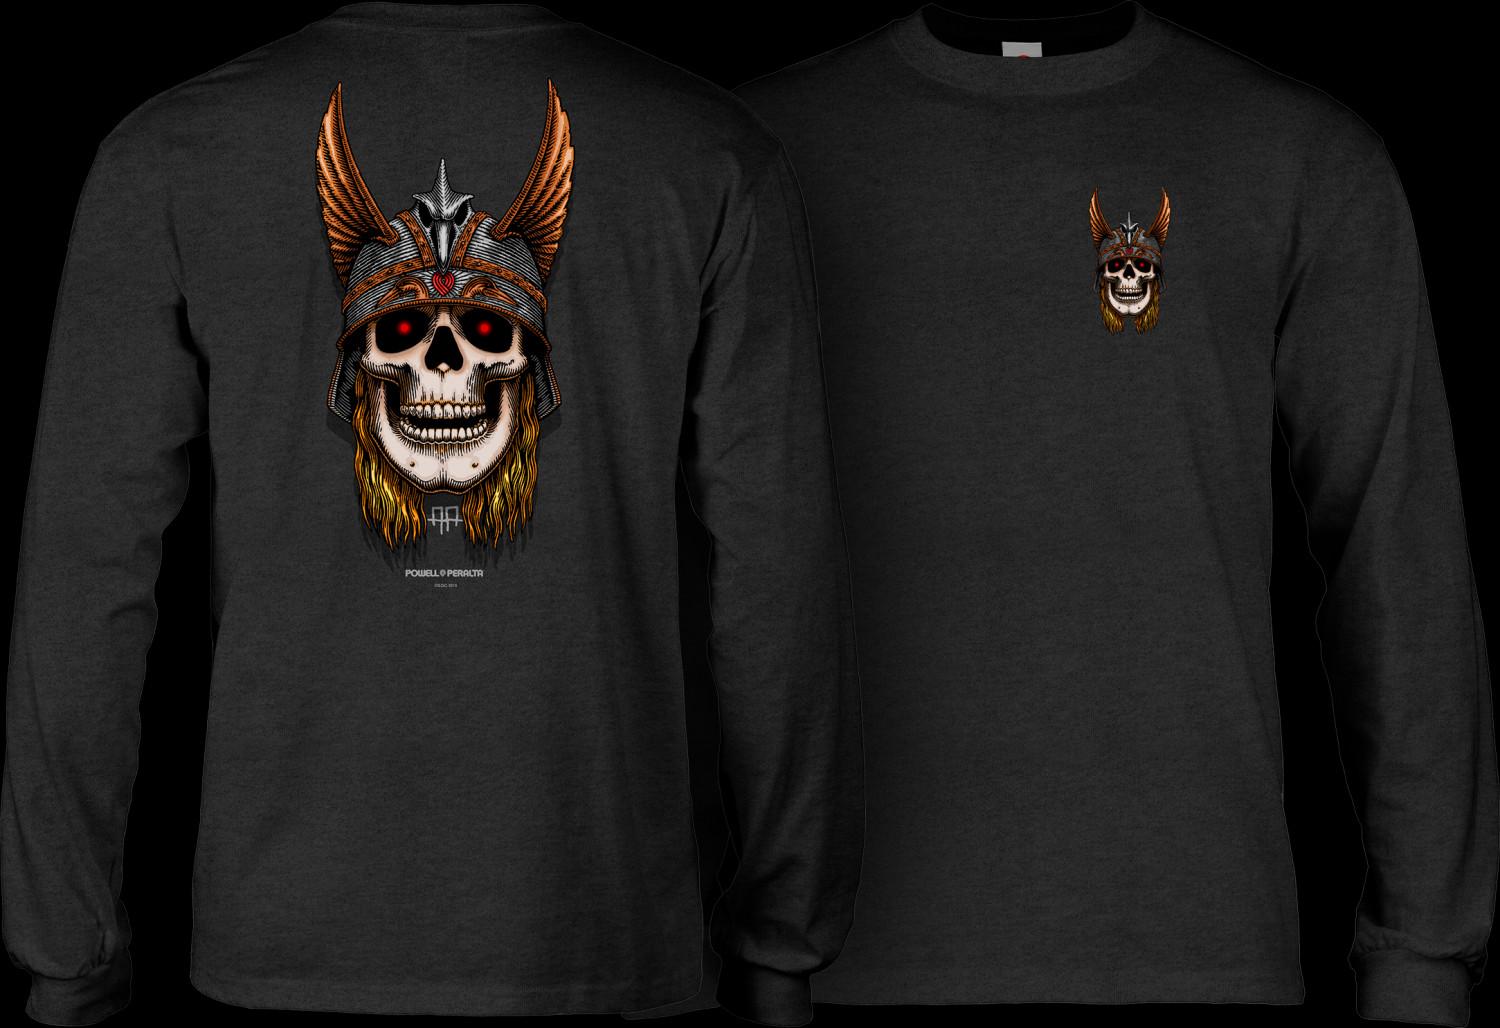 TEE L/S ANDERSON SKULL CHARCOAL HEATHER POWELL PERALTA